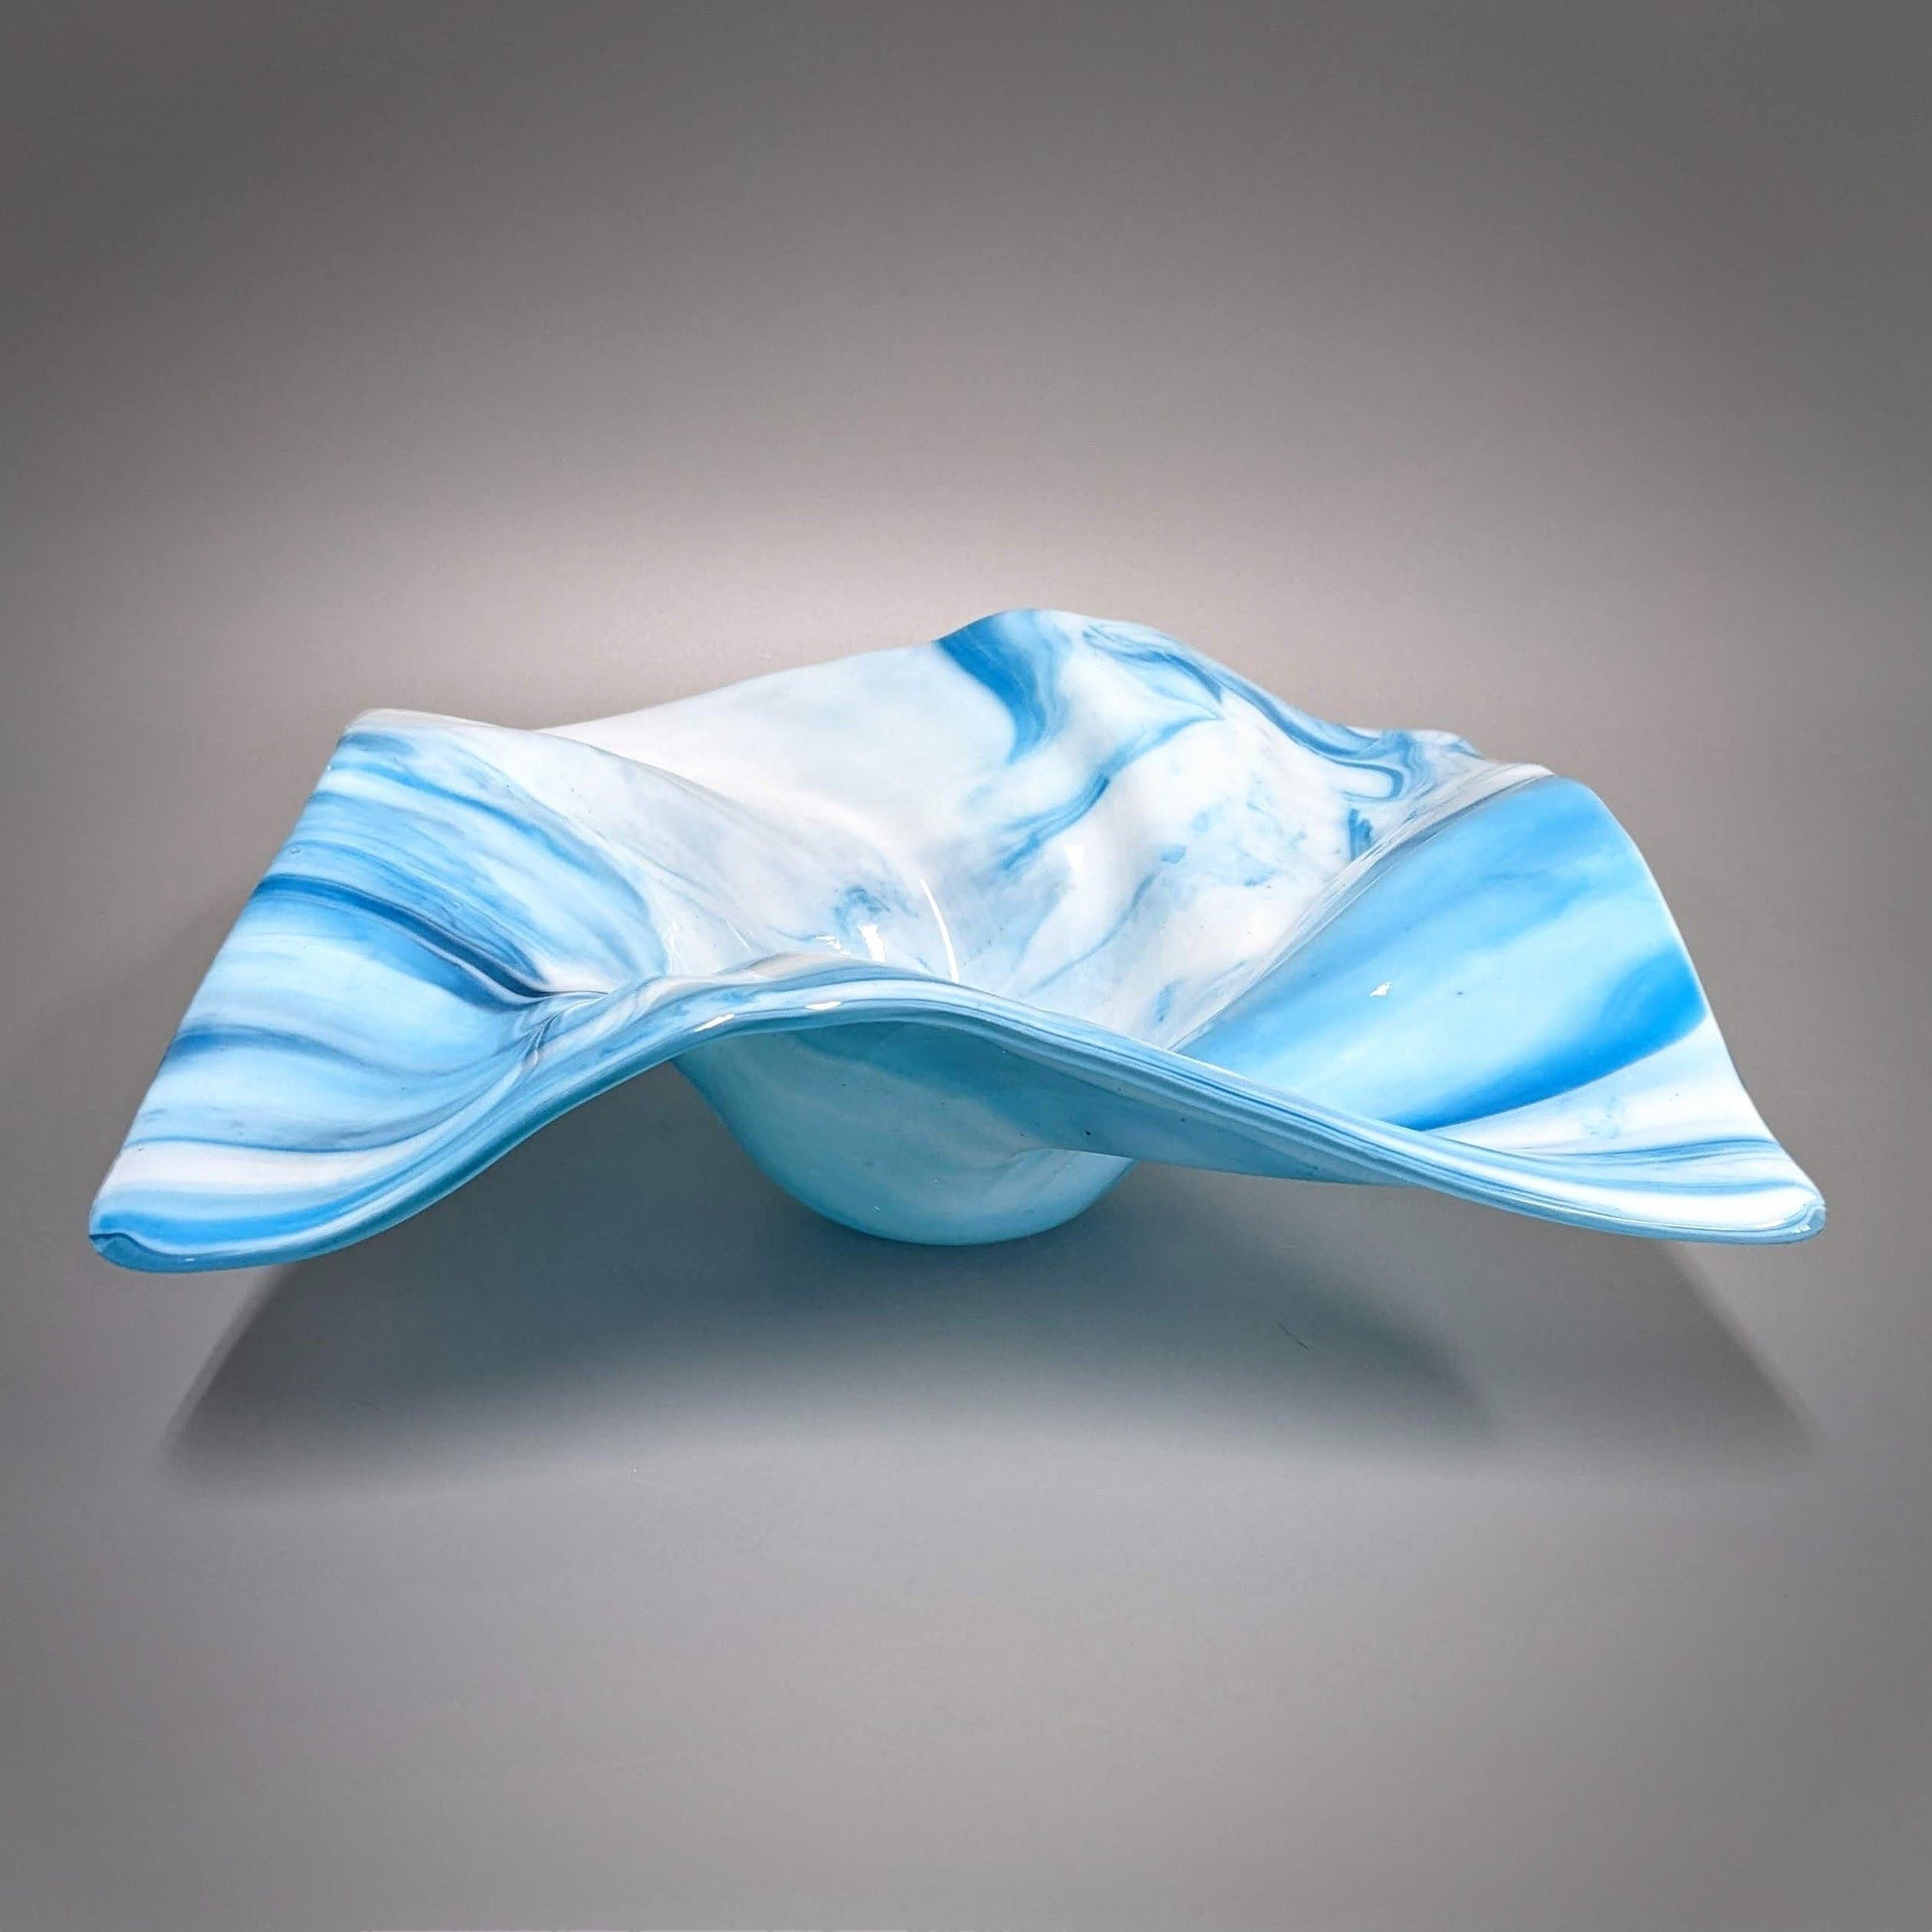 Glass Art Wave Sculpture Bowl in Azure Blue and White | Unique Gifts